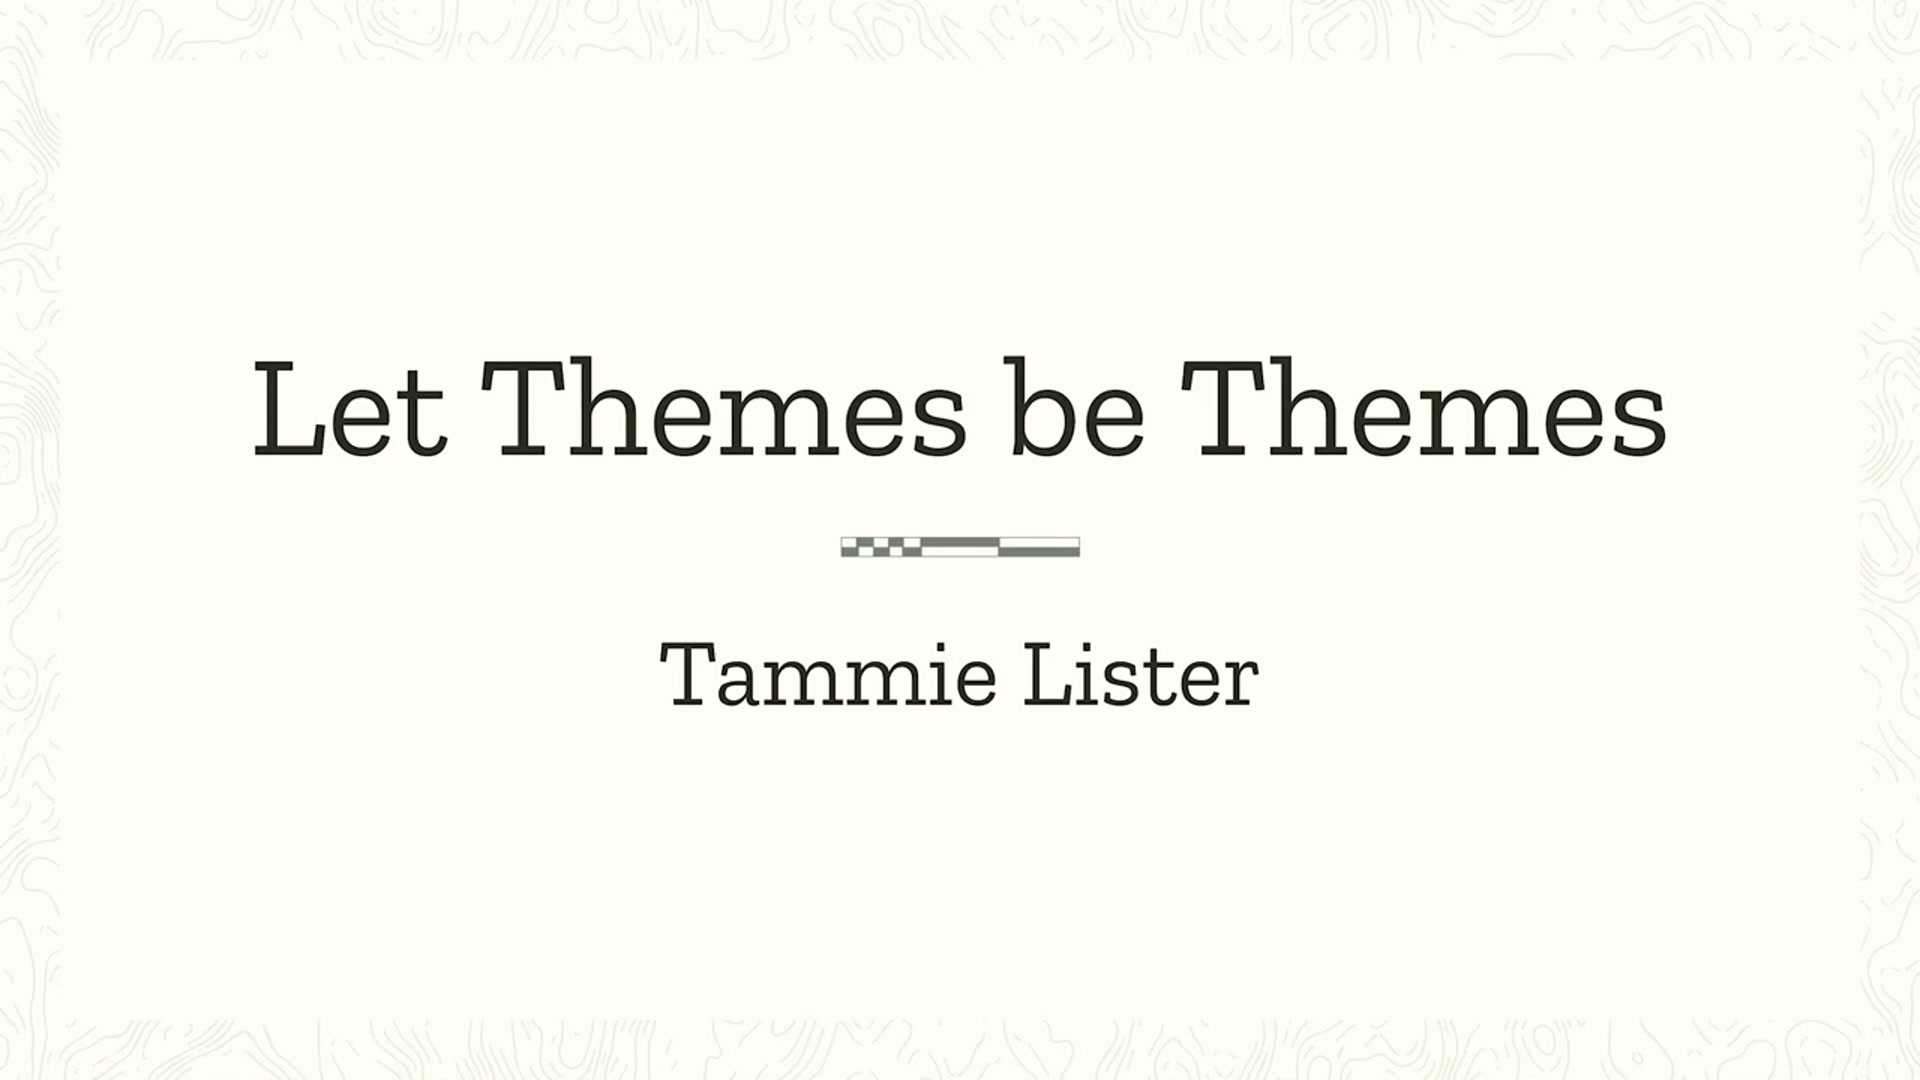 Tammie Lister: Let themes be themes